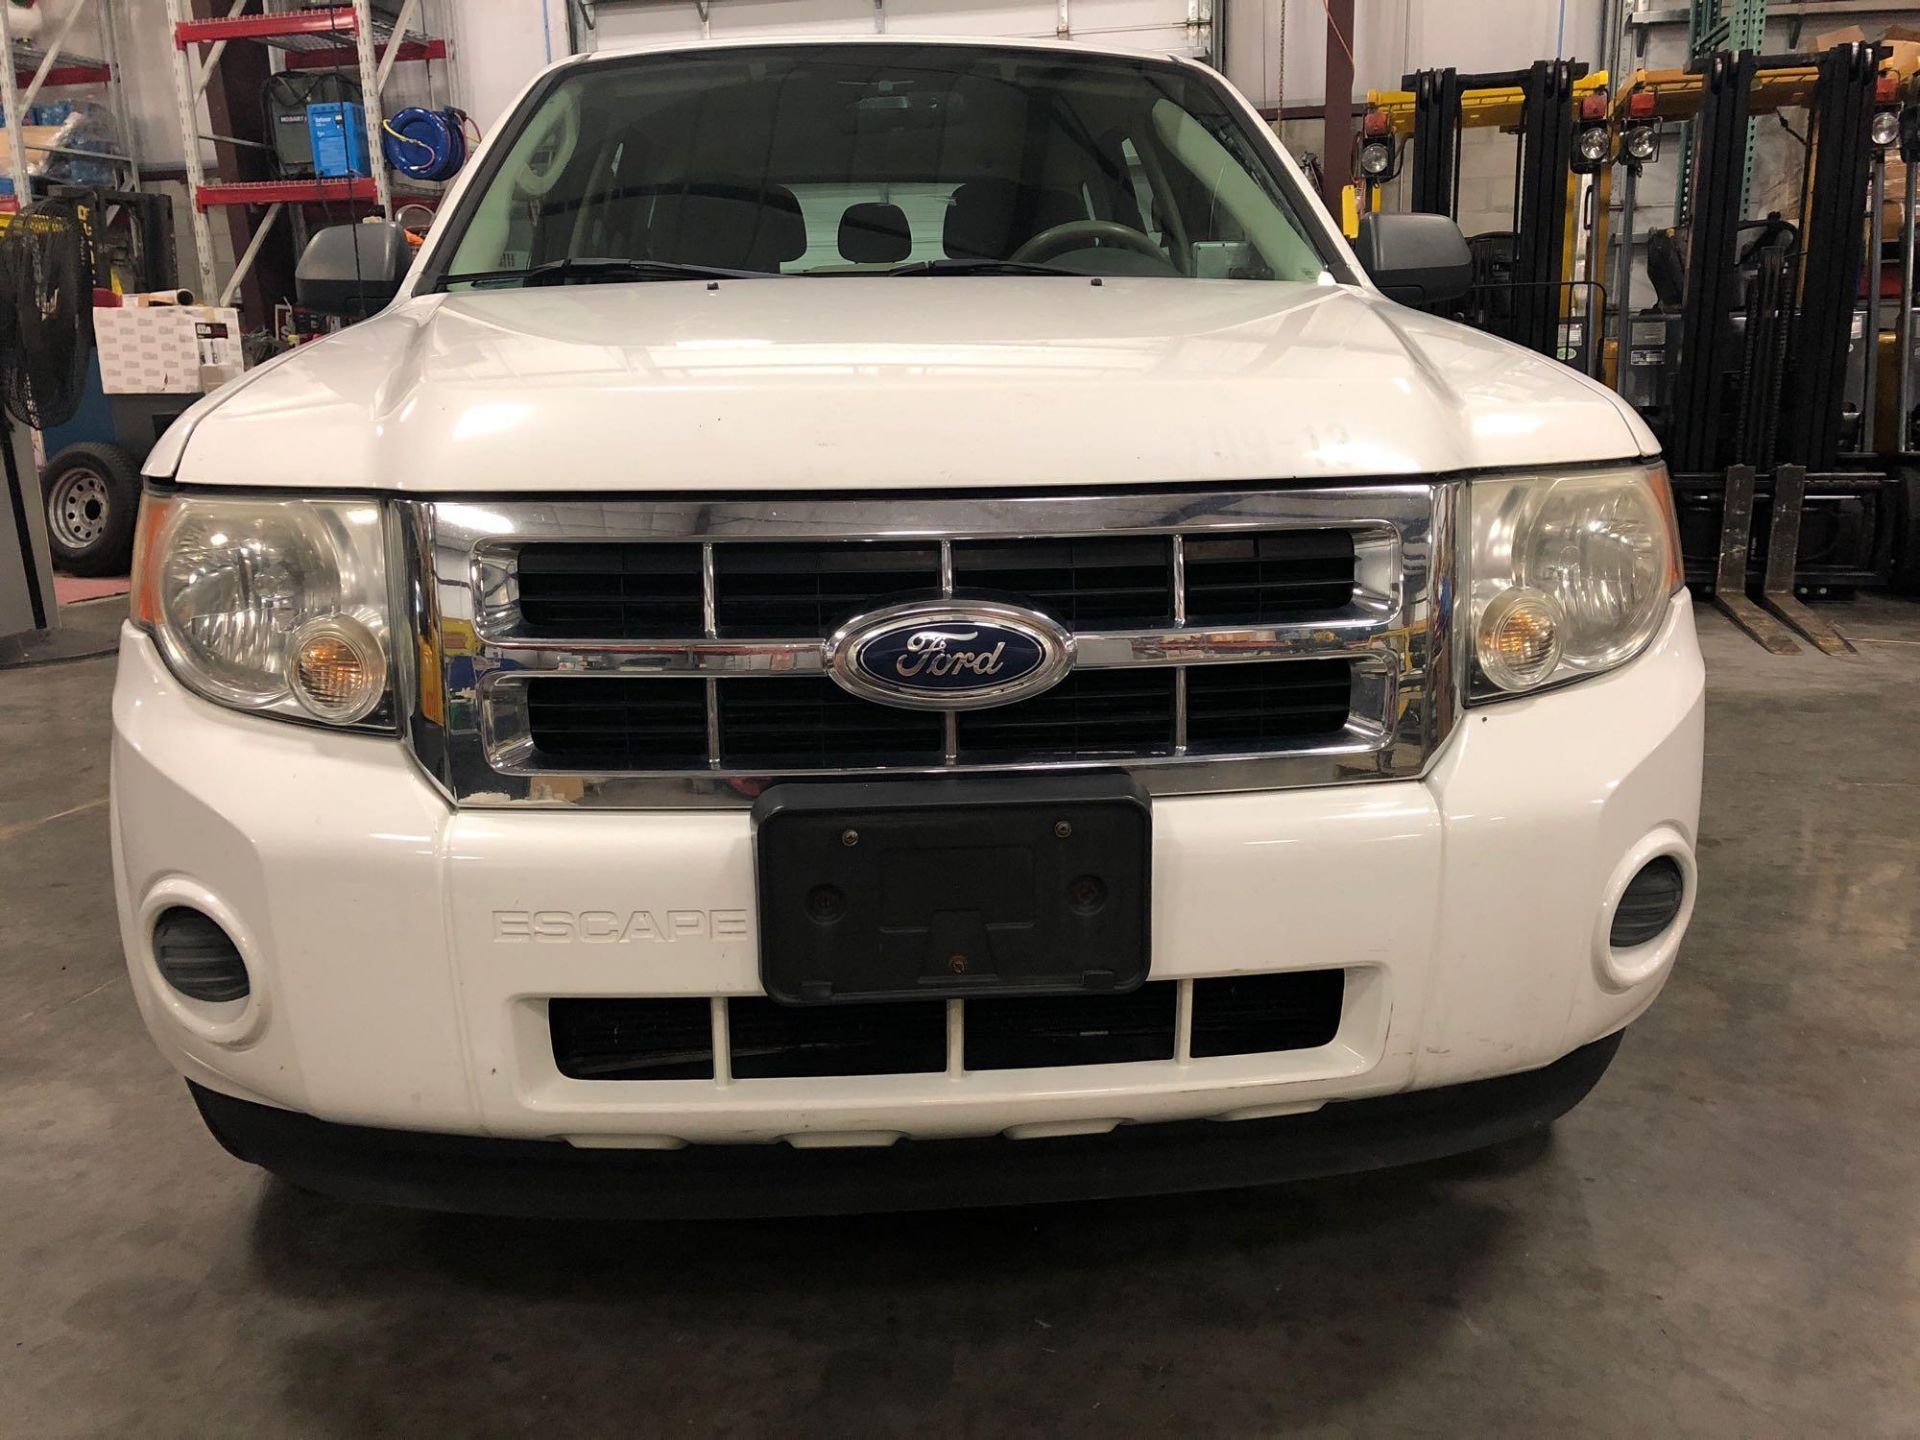 2010 FORD ESCAPE SUV, 4 DOOR, AUTOMATIC TRANSMISSION, RUNS - Image 6 of 17